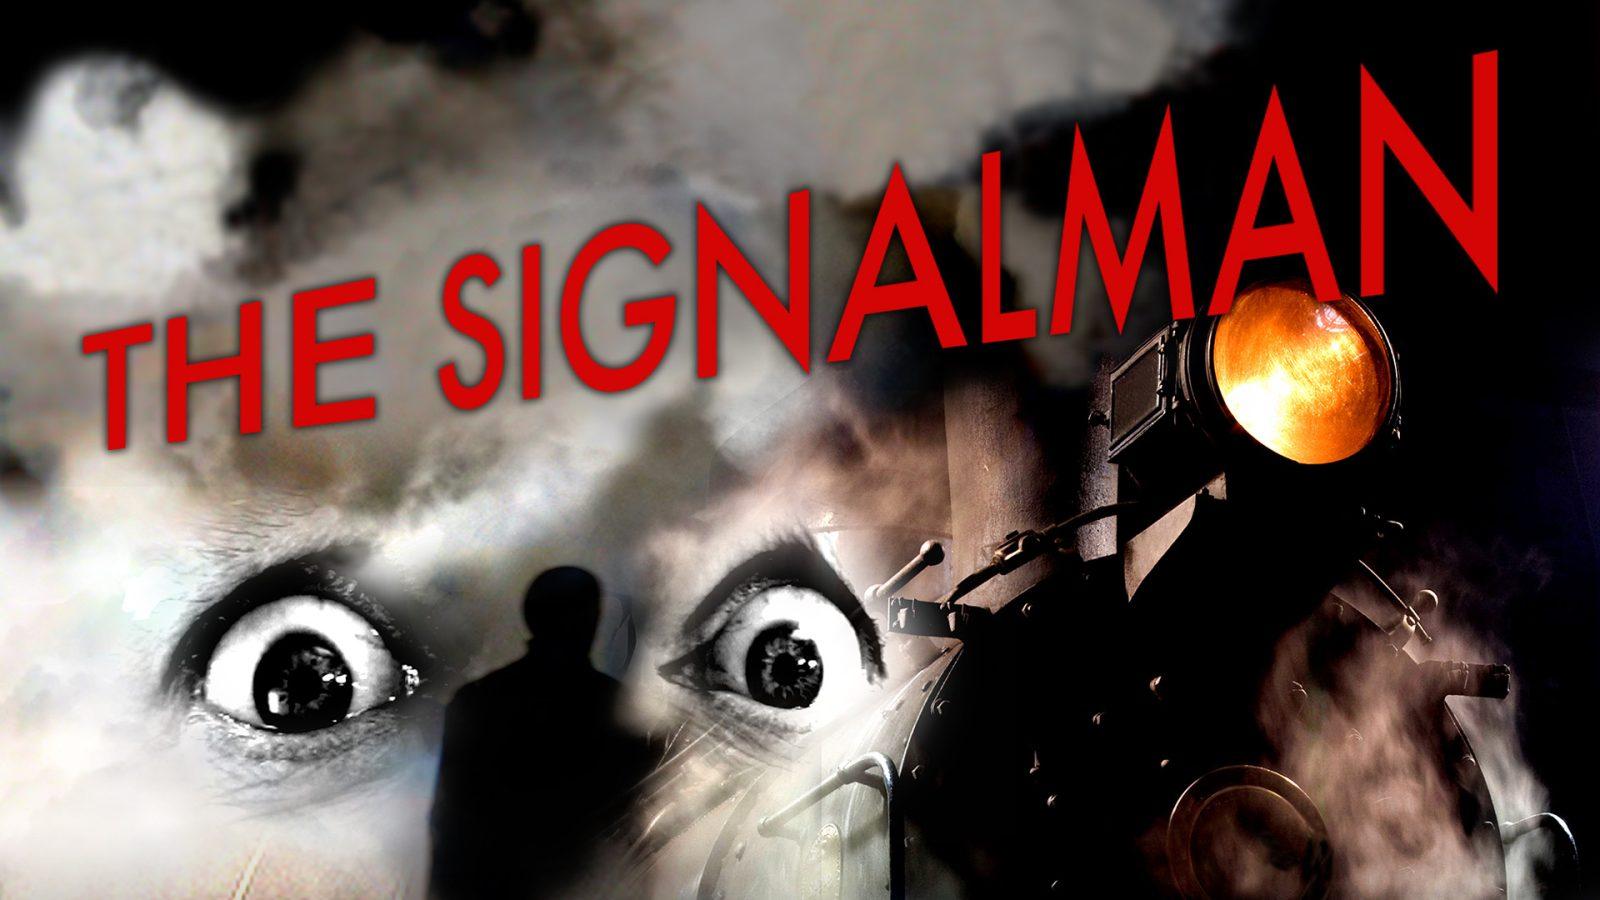 Who is the faceless figure by the tunnel warning the haunted signalman?